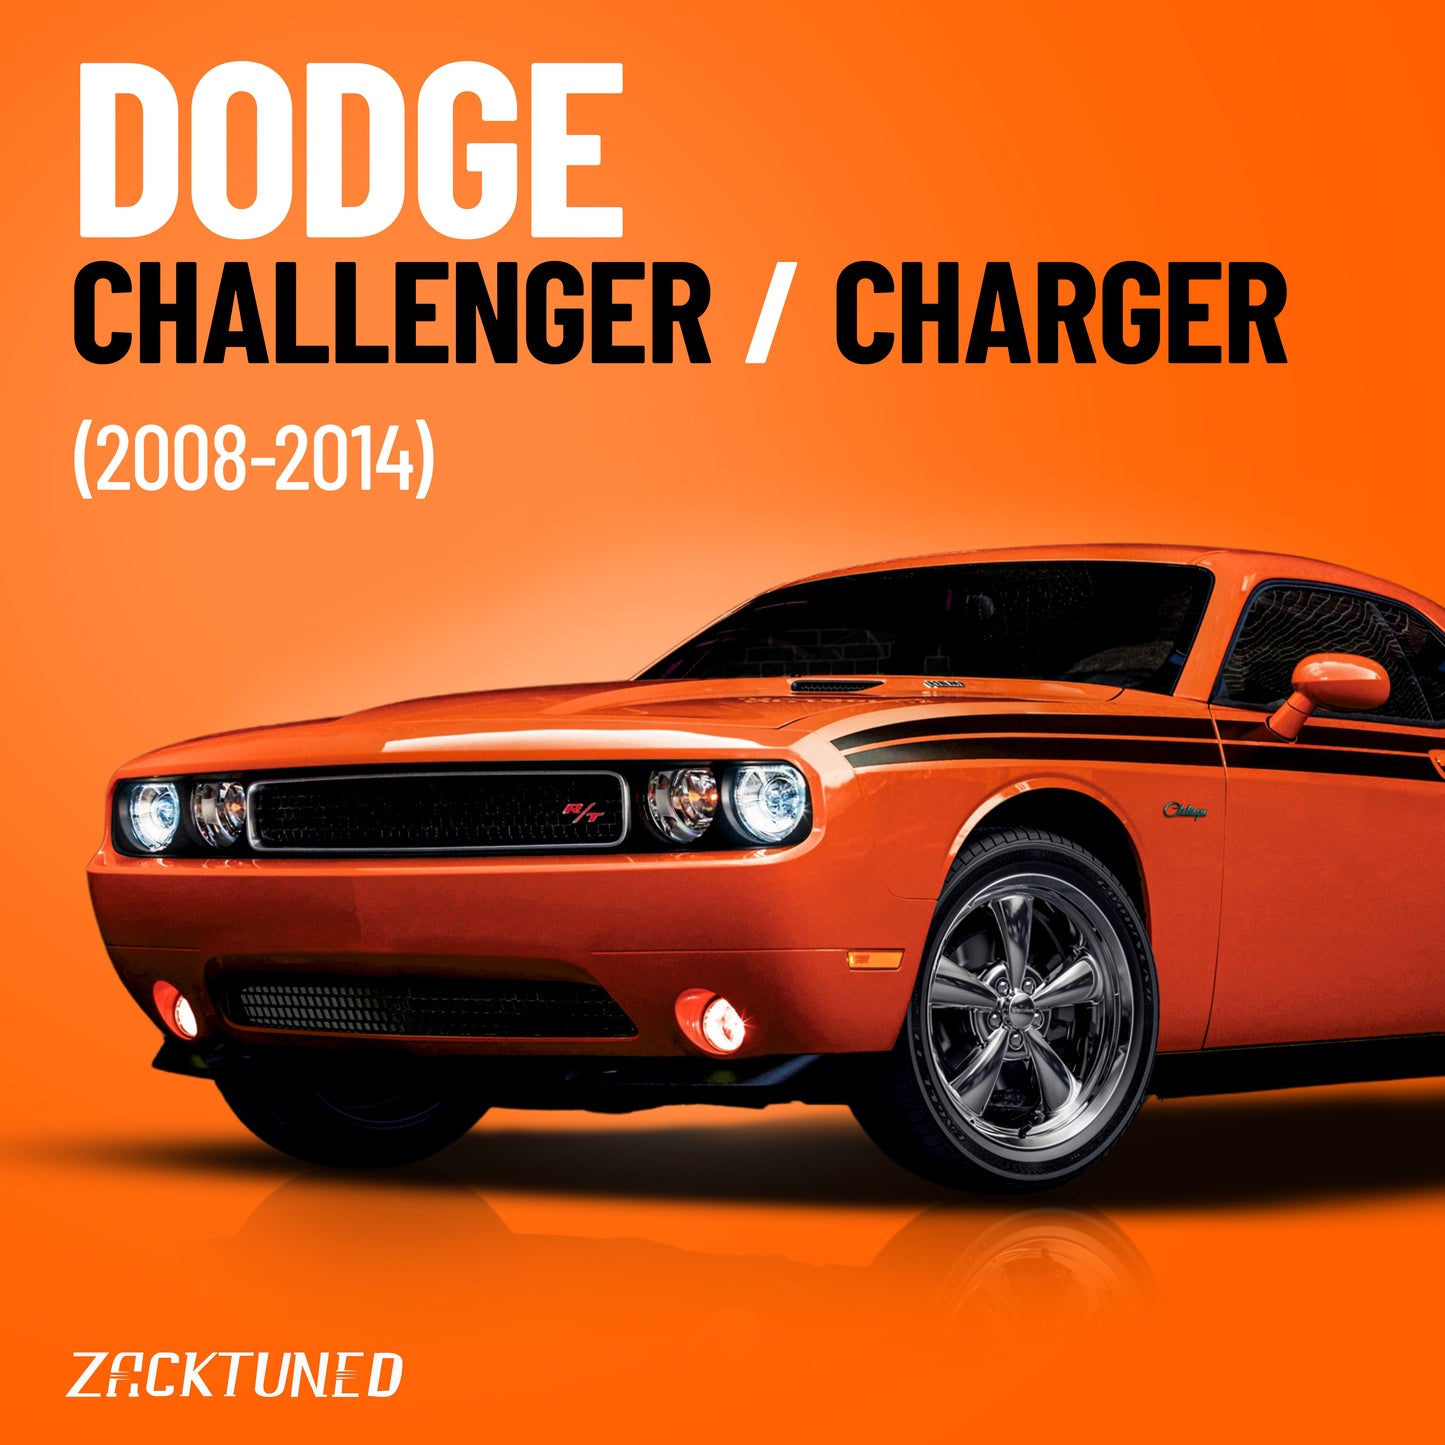 Dodge Challenger/Charger (2008-2014)